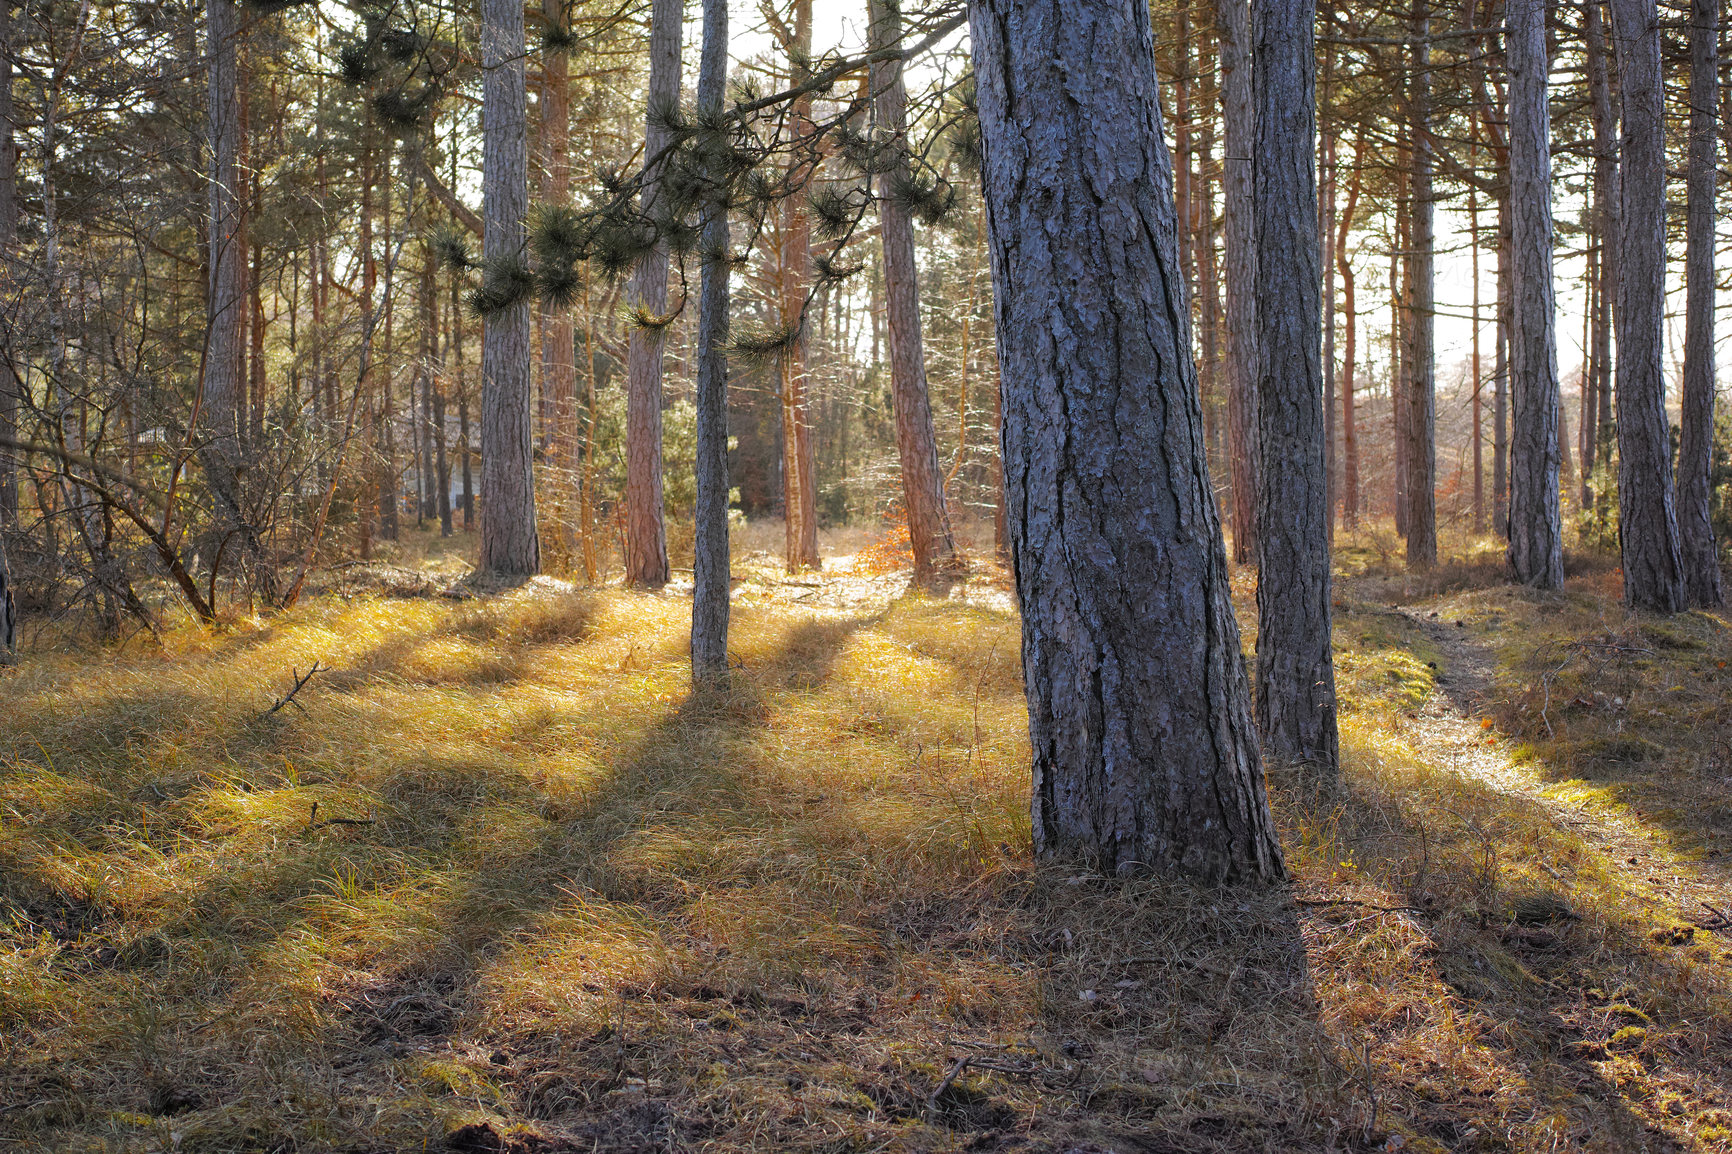 Buy stock photo Landscape of forest trees in the East coast Kattegat of Denmark where hiking trails and adventure awaits out in nature. Spring brings sunlight to the tall trees and dry grassland. 